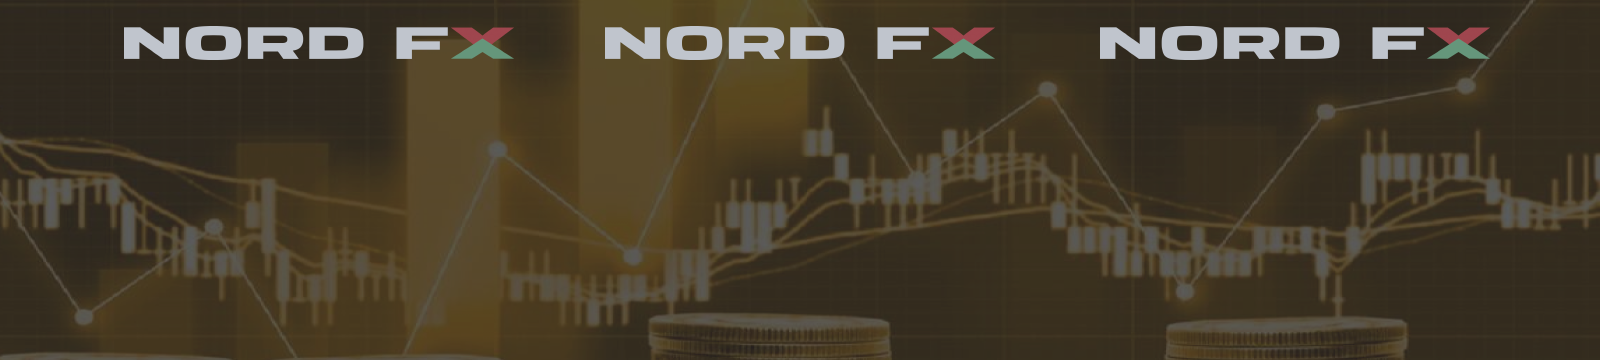 Forex and Cryptocurrencies Forecast for June 21 - 25, 2021